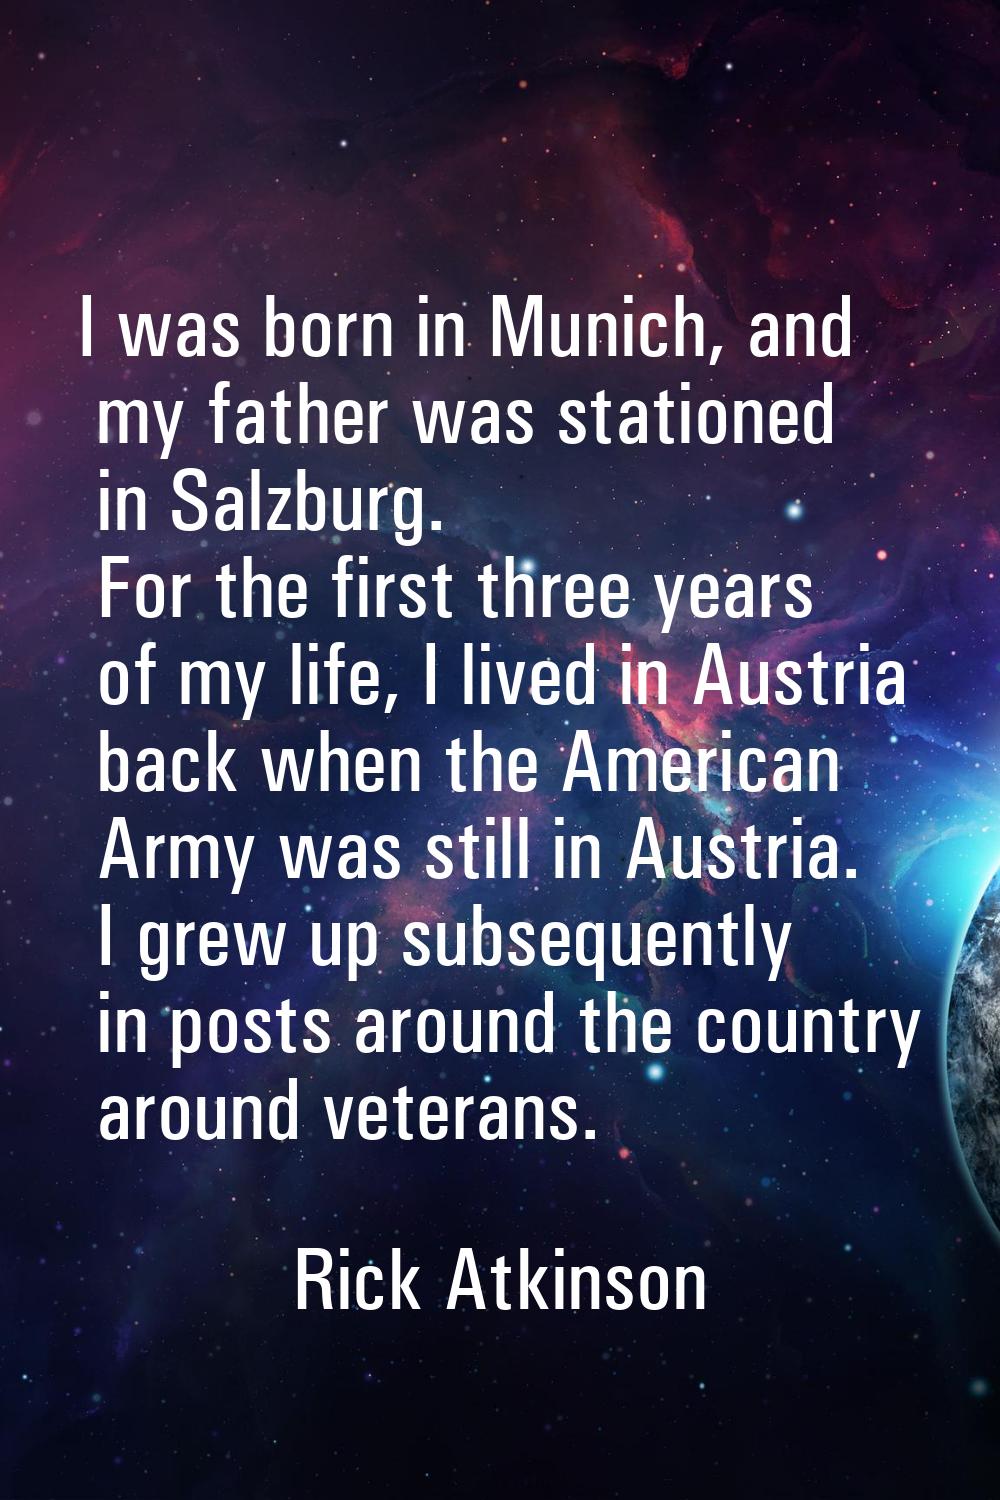 I was born in Munich, and my father was stationed in Salzburg. For the first three years of my life